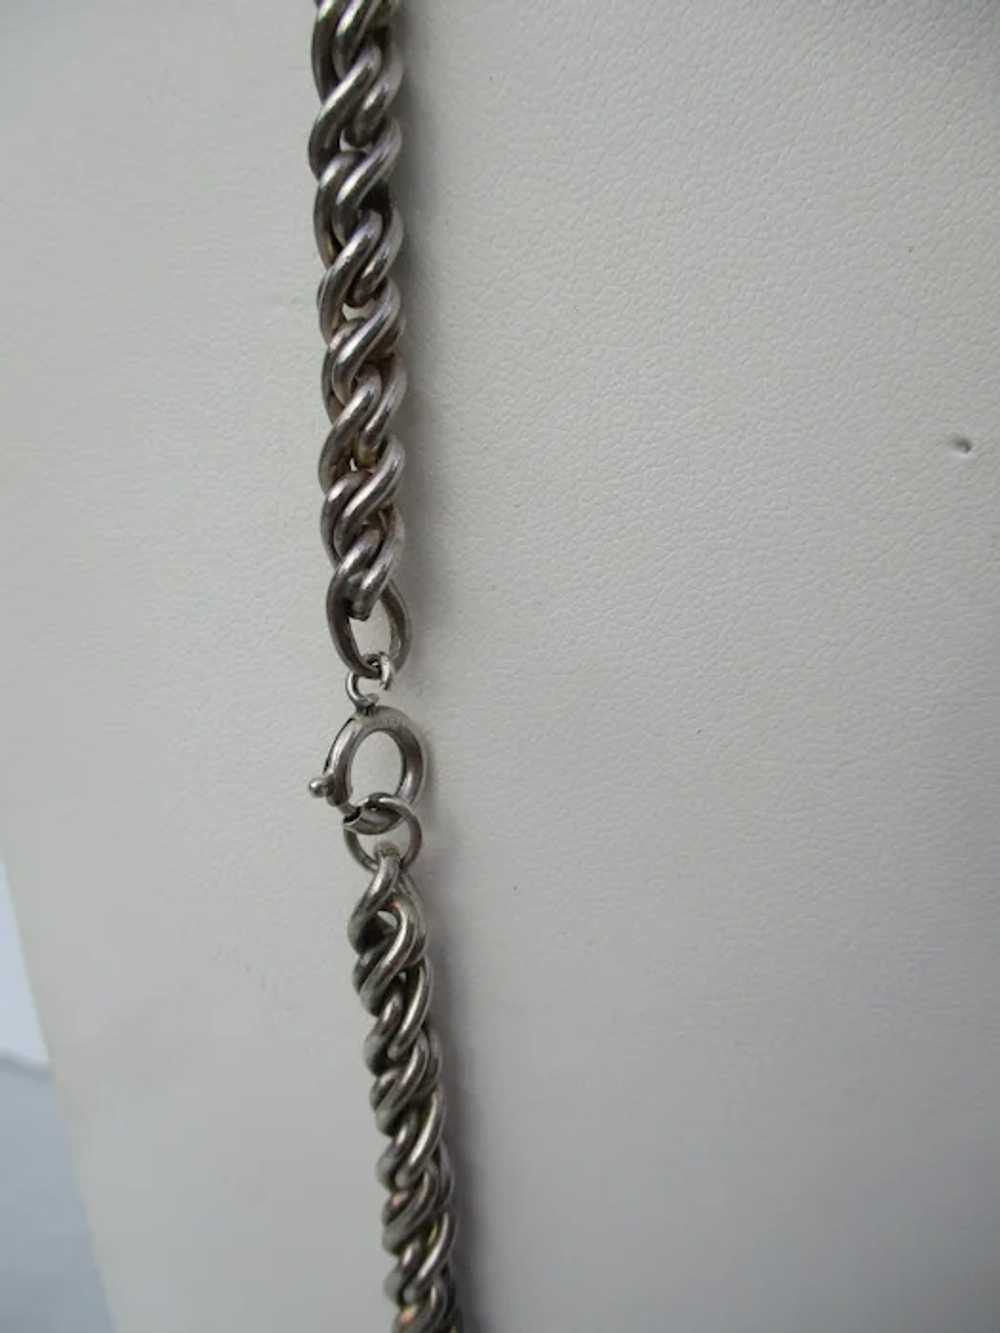 Long Silver Solid Chain 28.5" Long - image 5